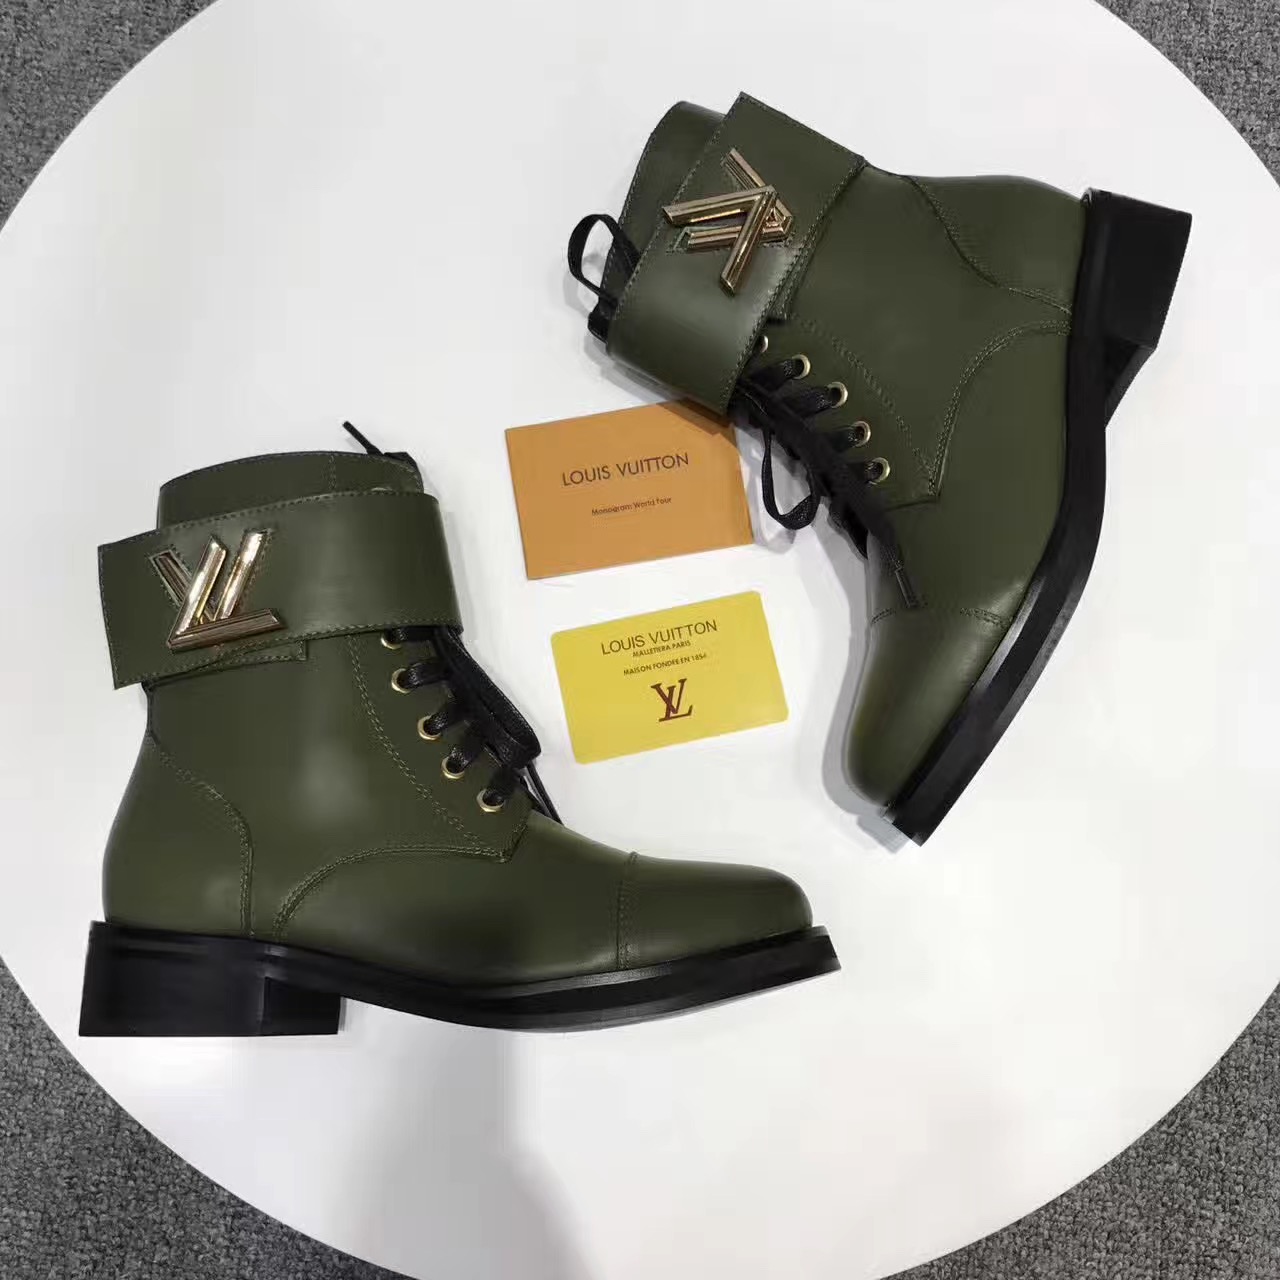 Louis Vuitton Wonderland Ranger Ankle Boots 1A1IY6 Olive Green Leather 2017 (GD50232-7082338 )